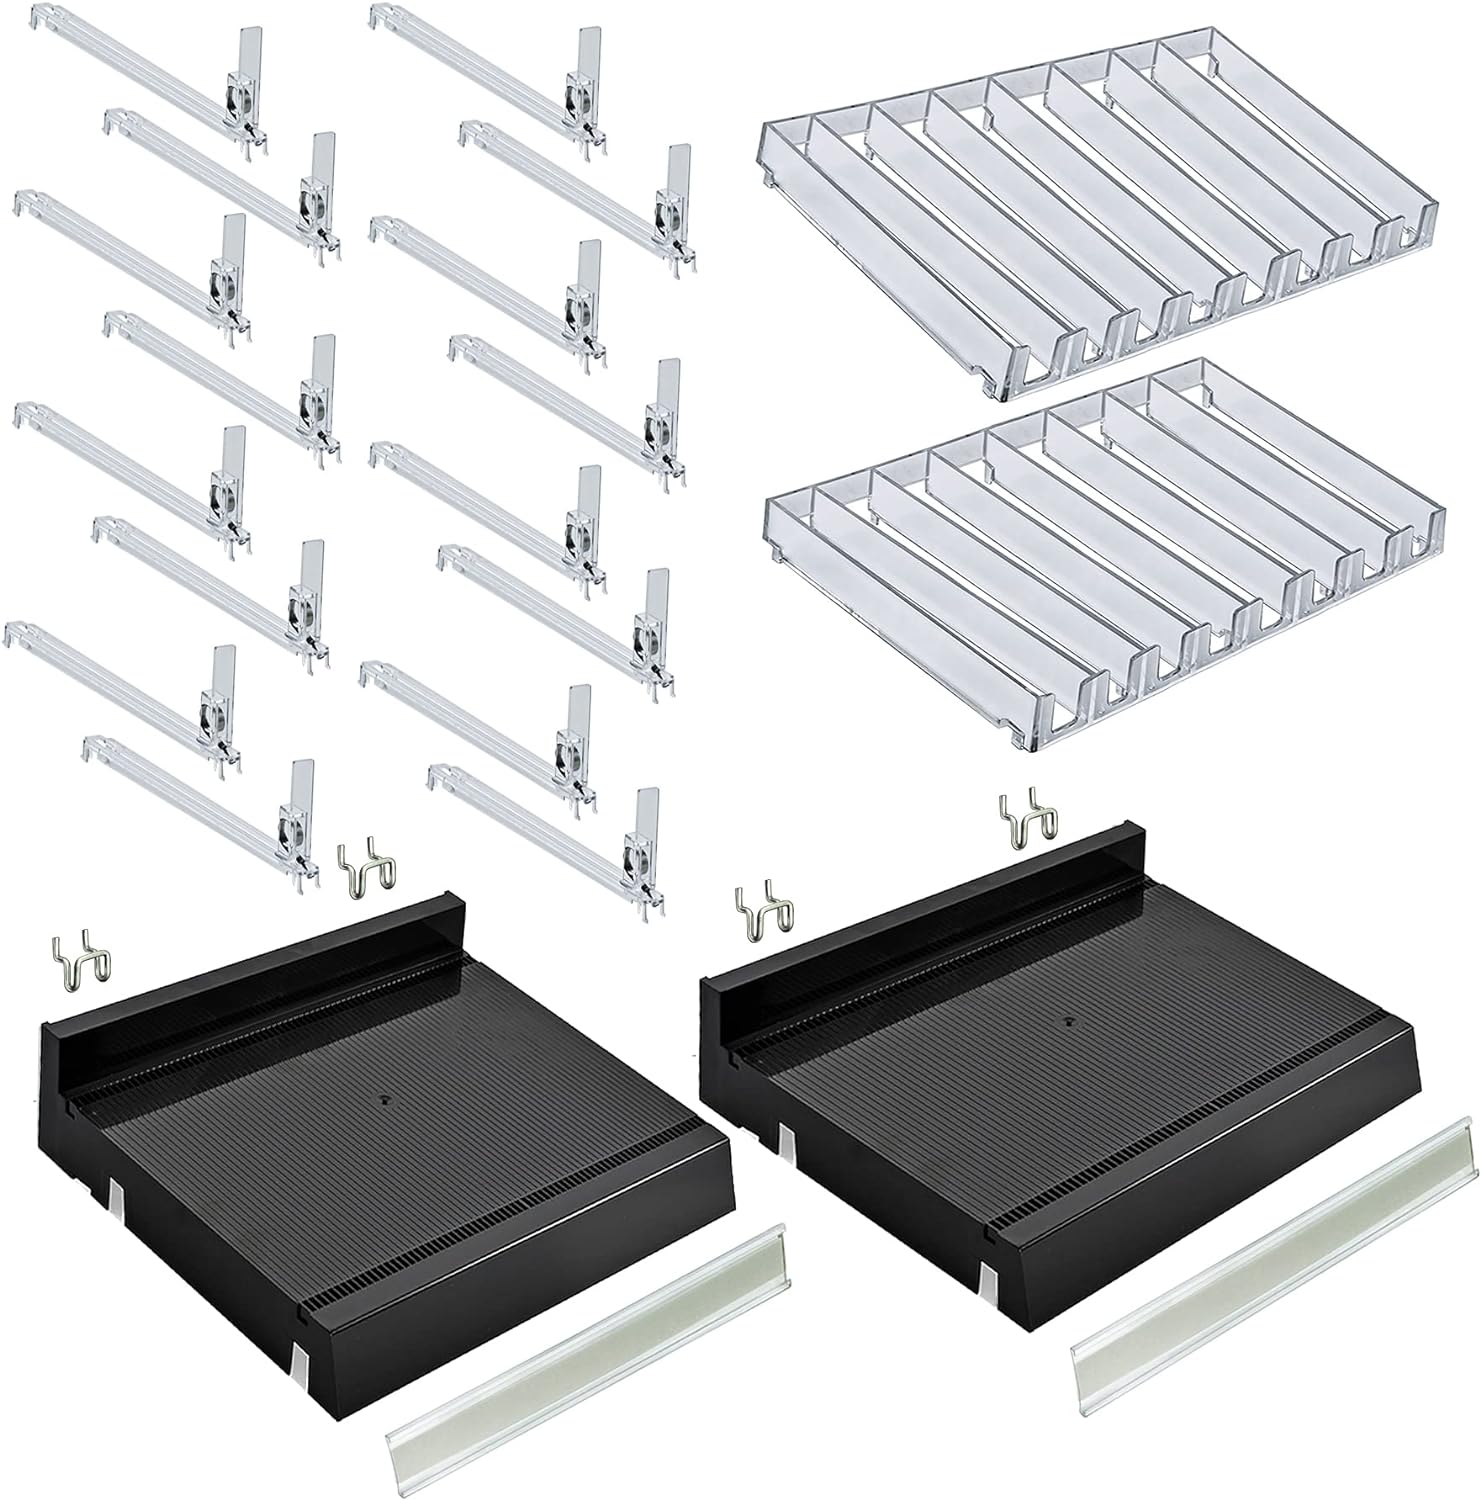 Azar Displays 225830-8COMP-BLK 8 Compartment Divider Bin Cosmetic Tray with Pushers - 8 Slots per Tray, 2-Pack, Black